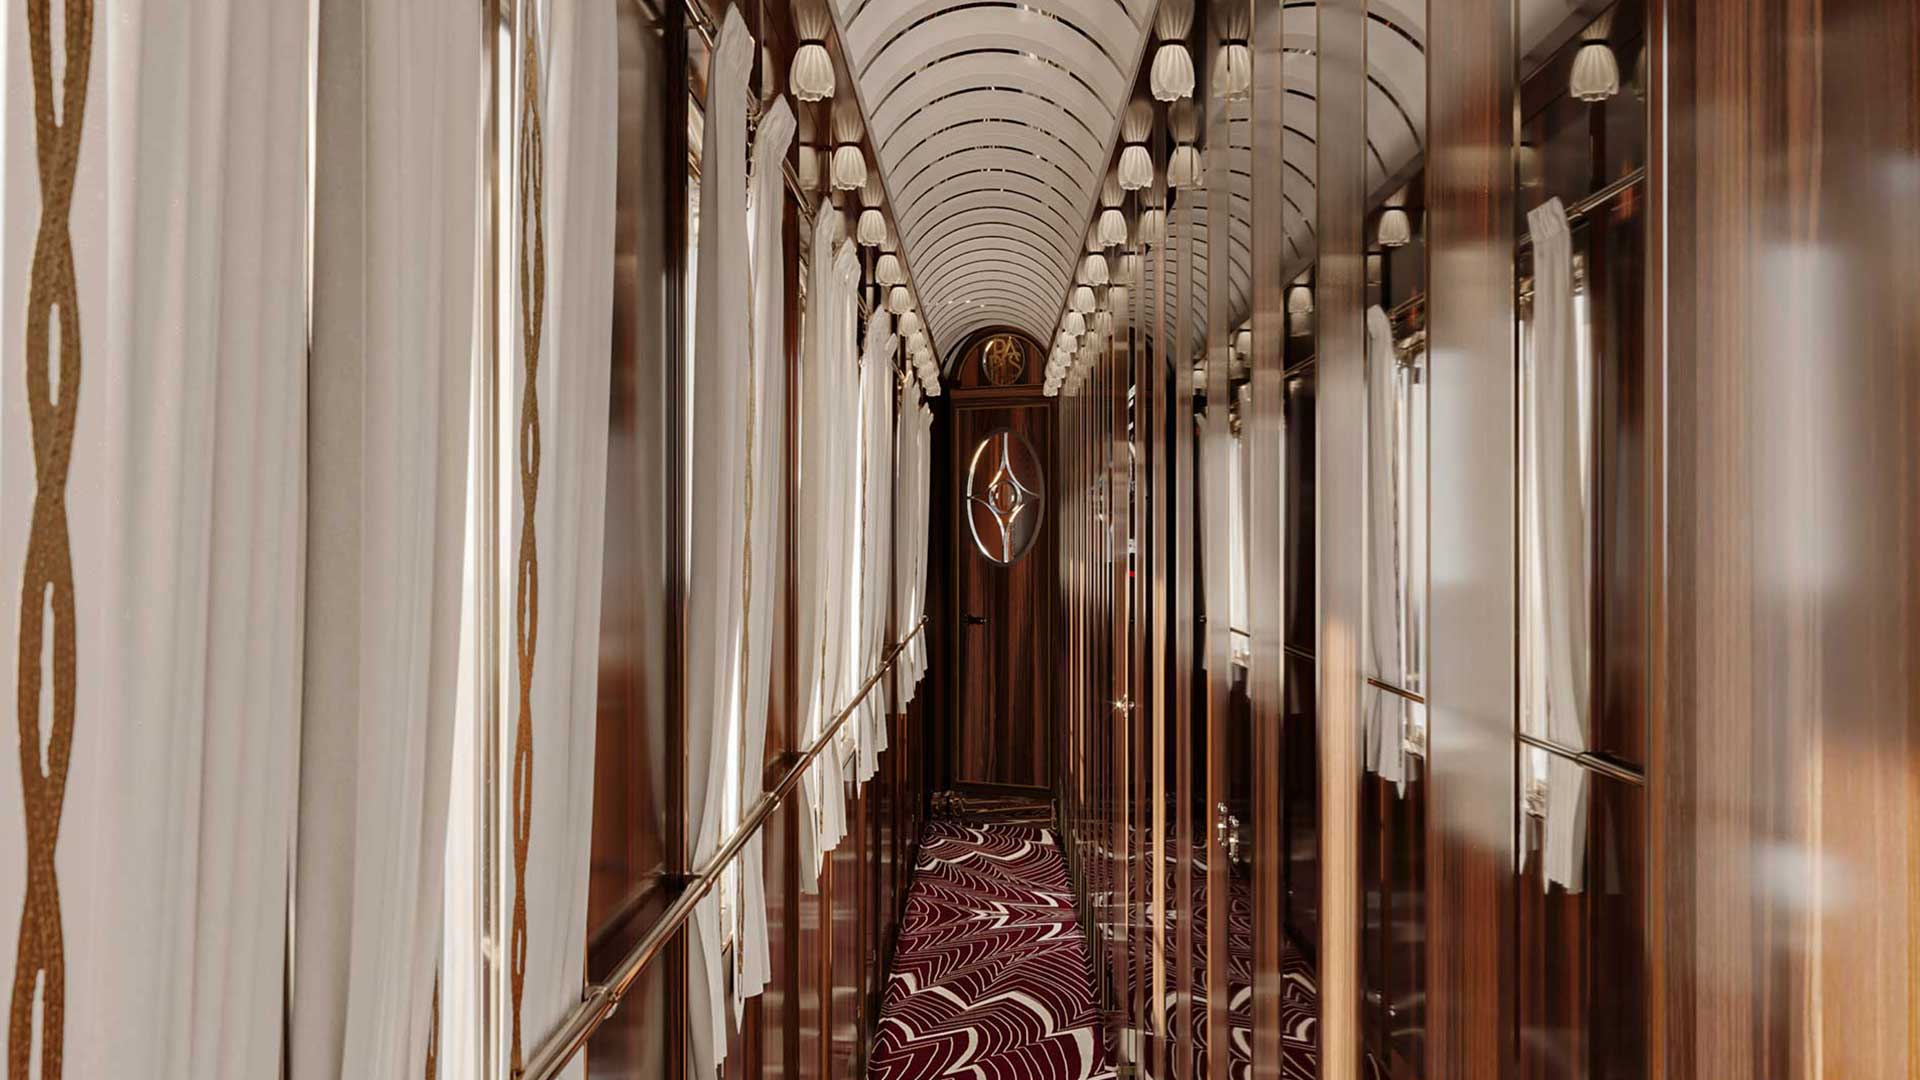 Steering the Orient-Express train